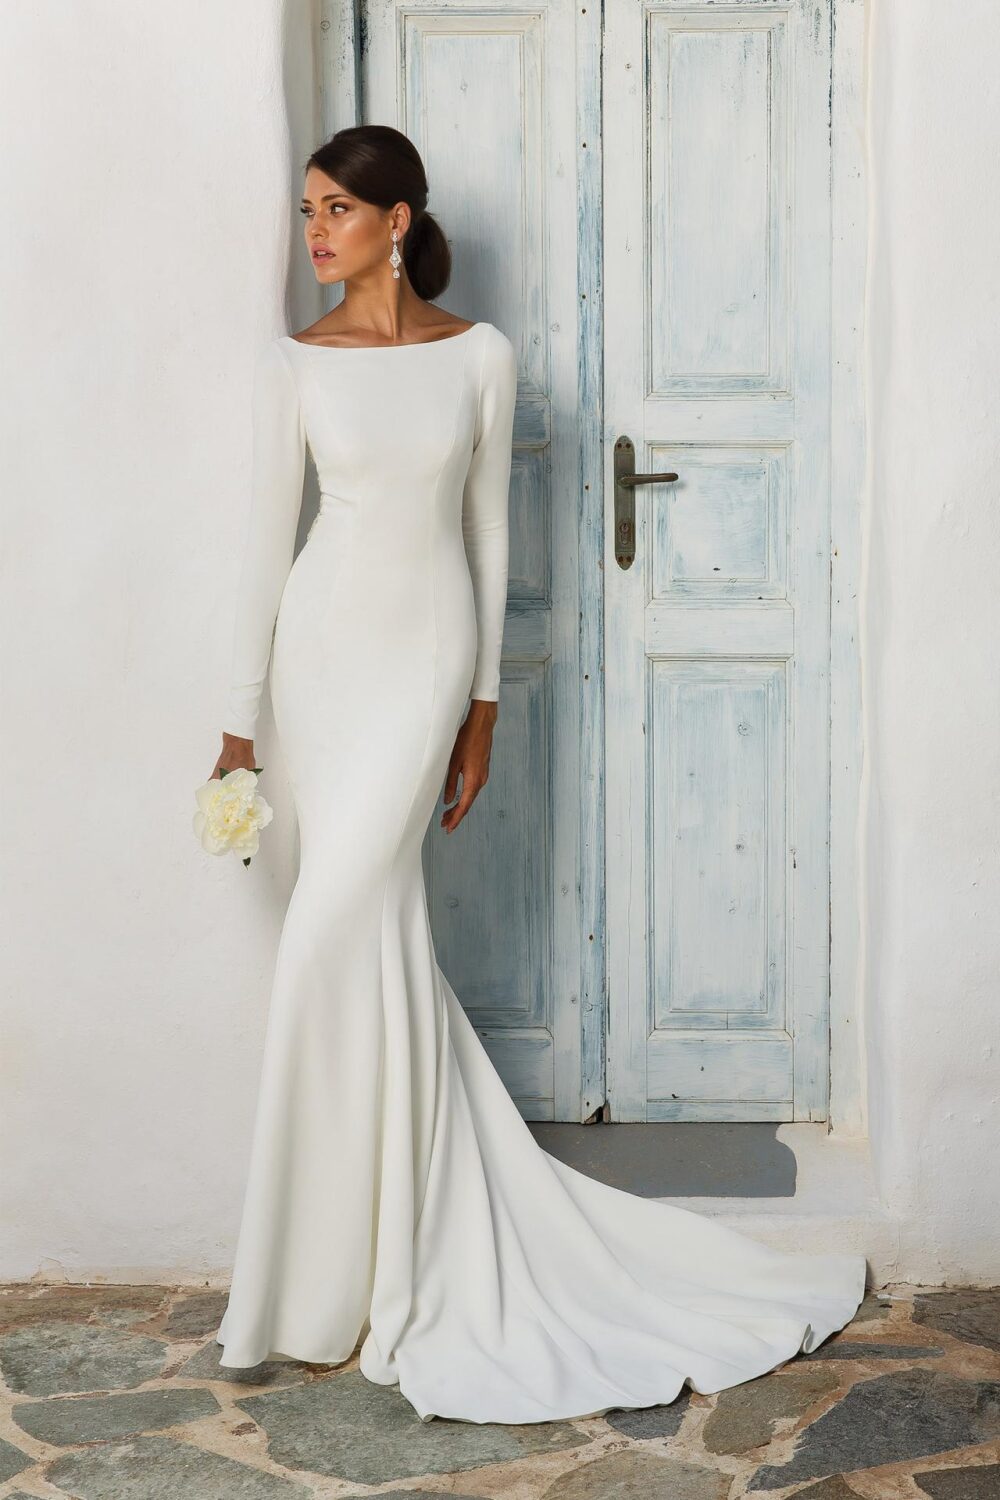 Best Wedding Dresses With Long Sleeves ...